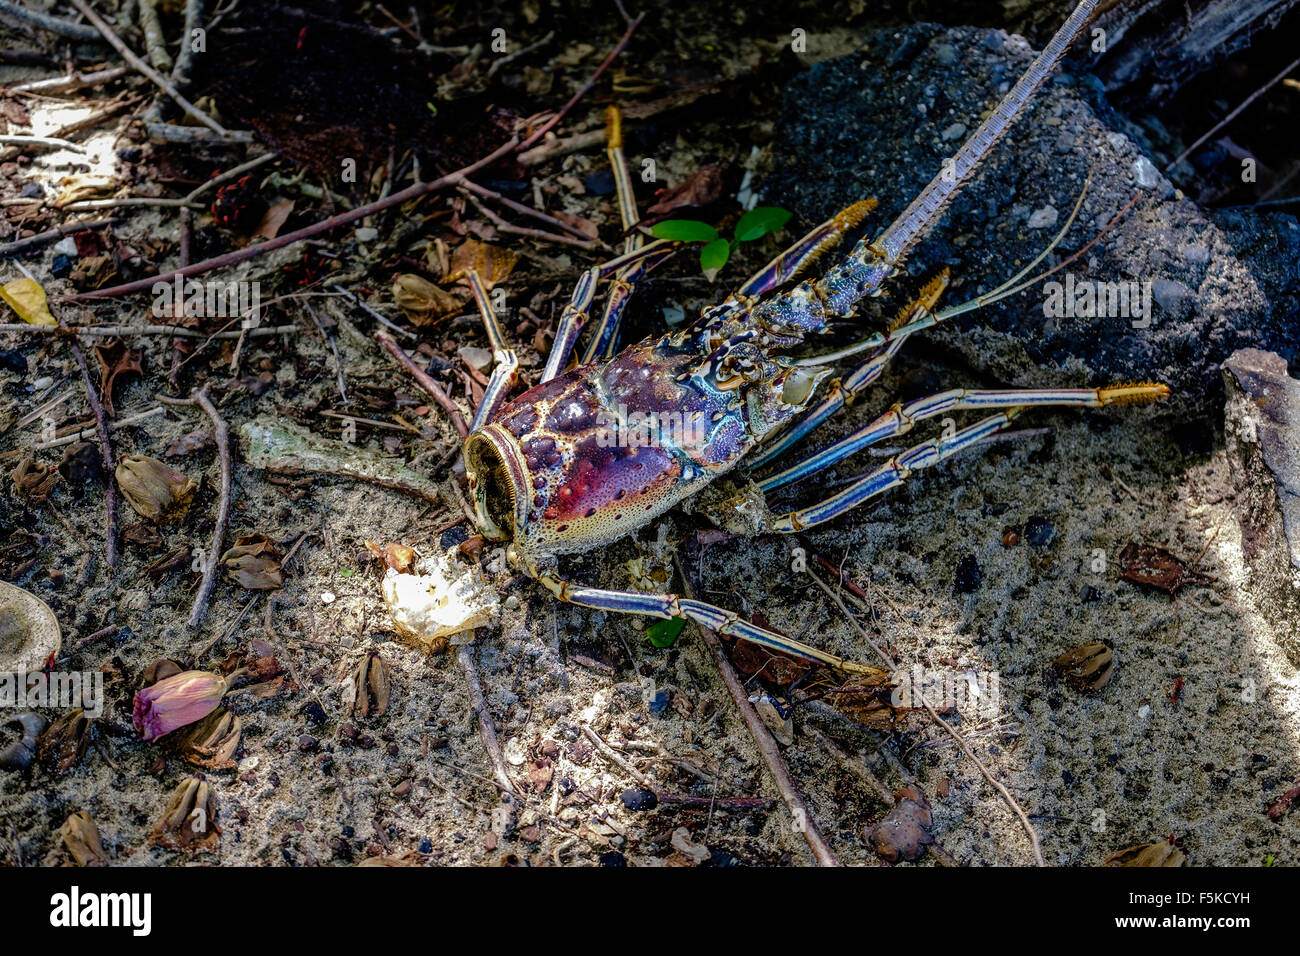 The head of a Caribbean spiny lobster found on the beach of St. Croix, U.S. Virgin Islands. Stock Photo